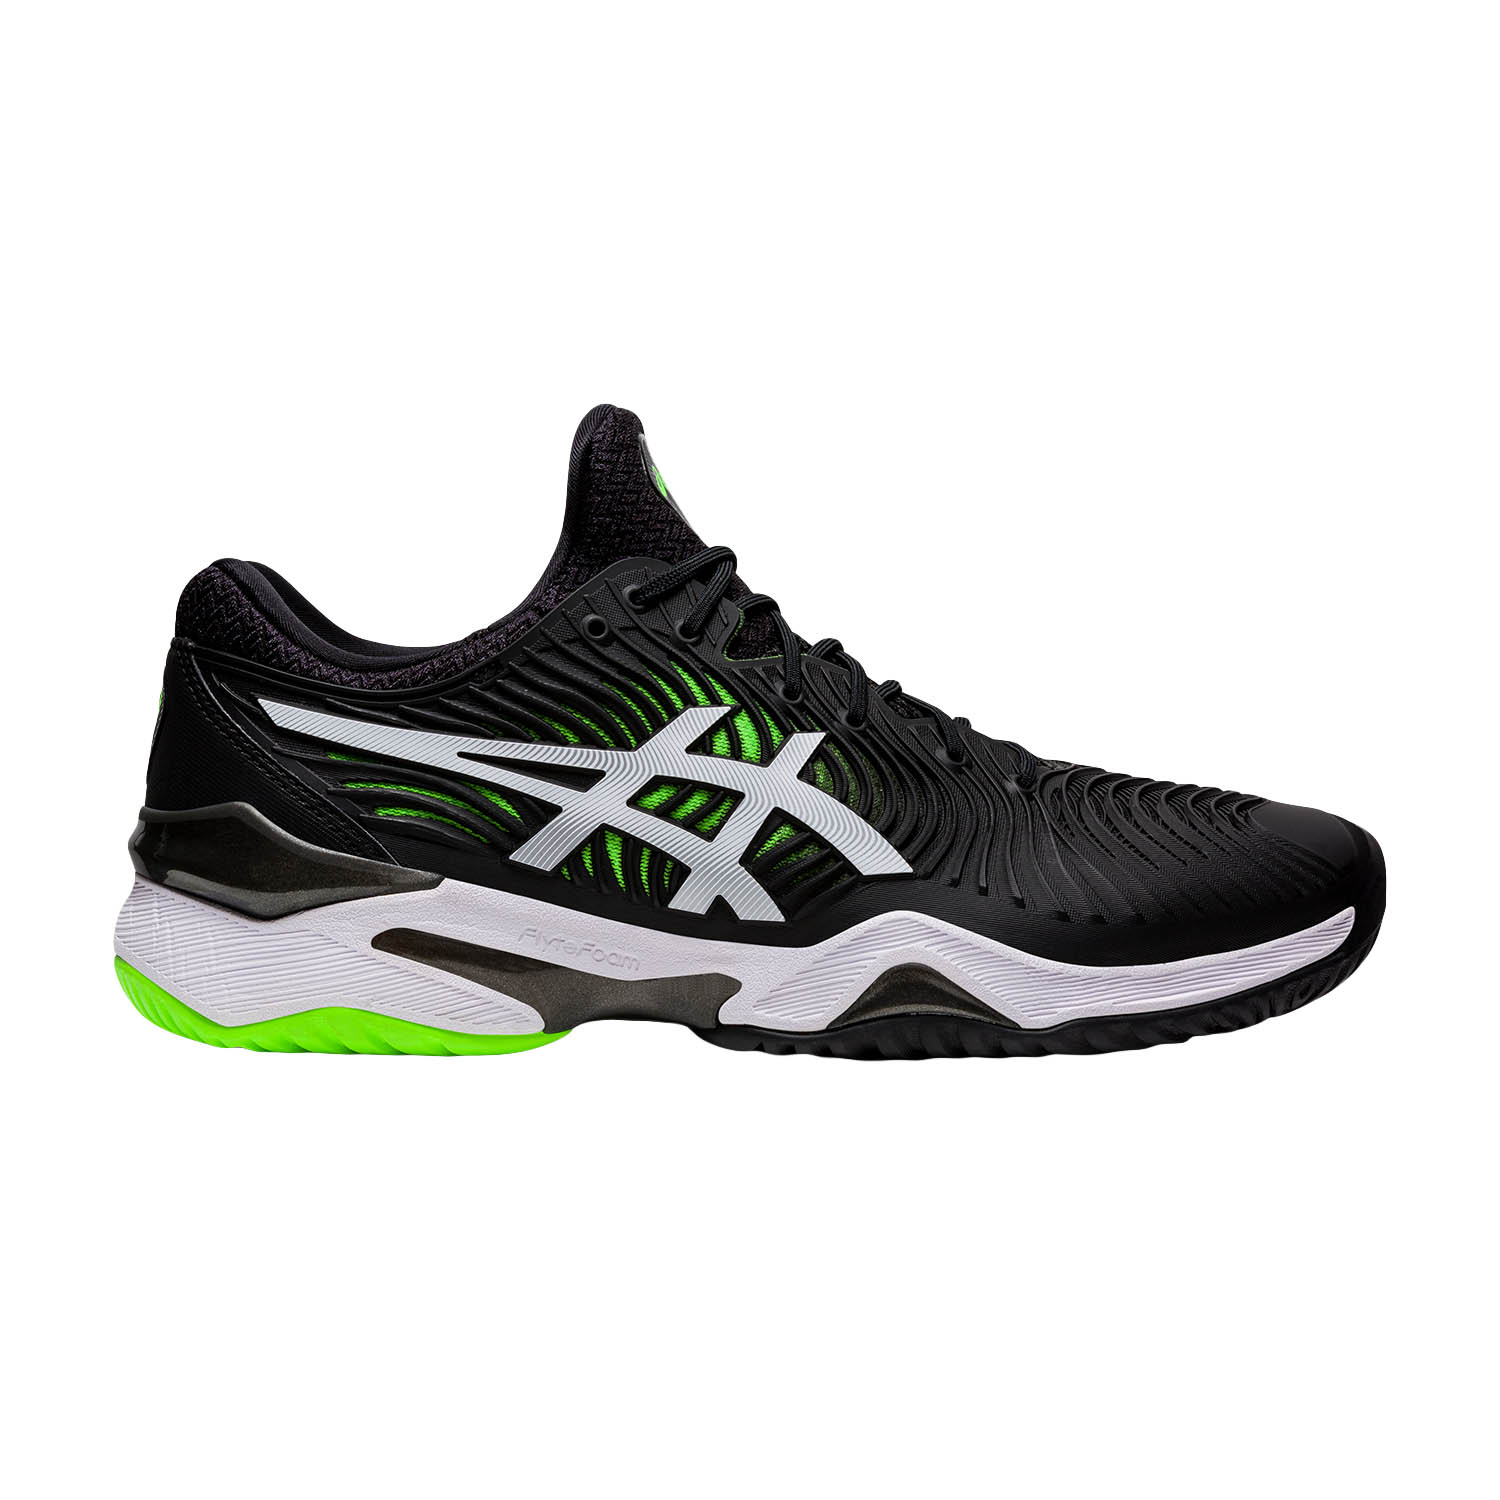 asics colorful tennis shoes